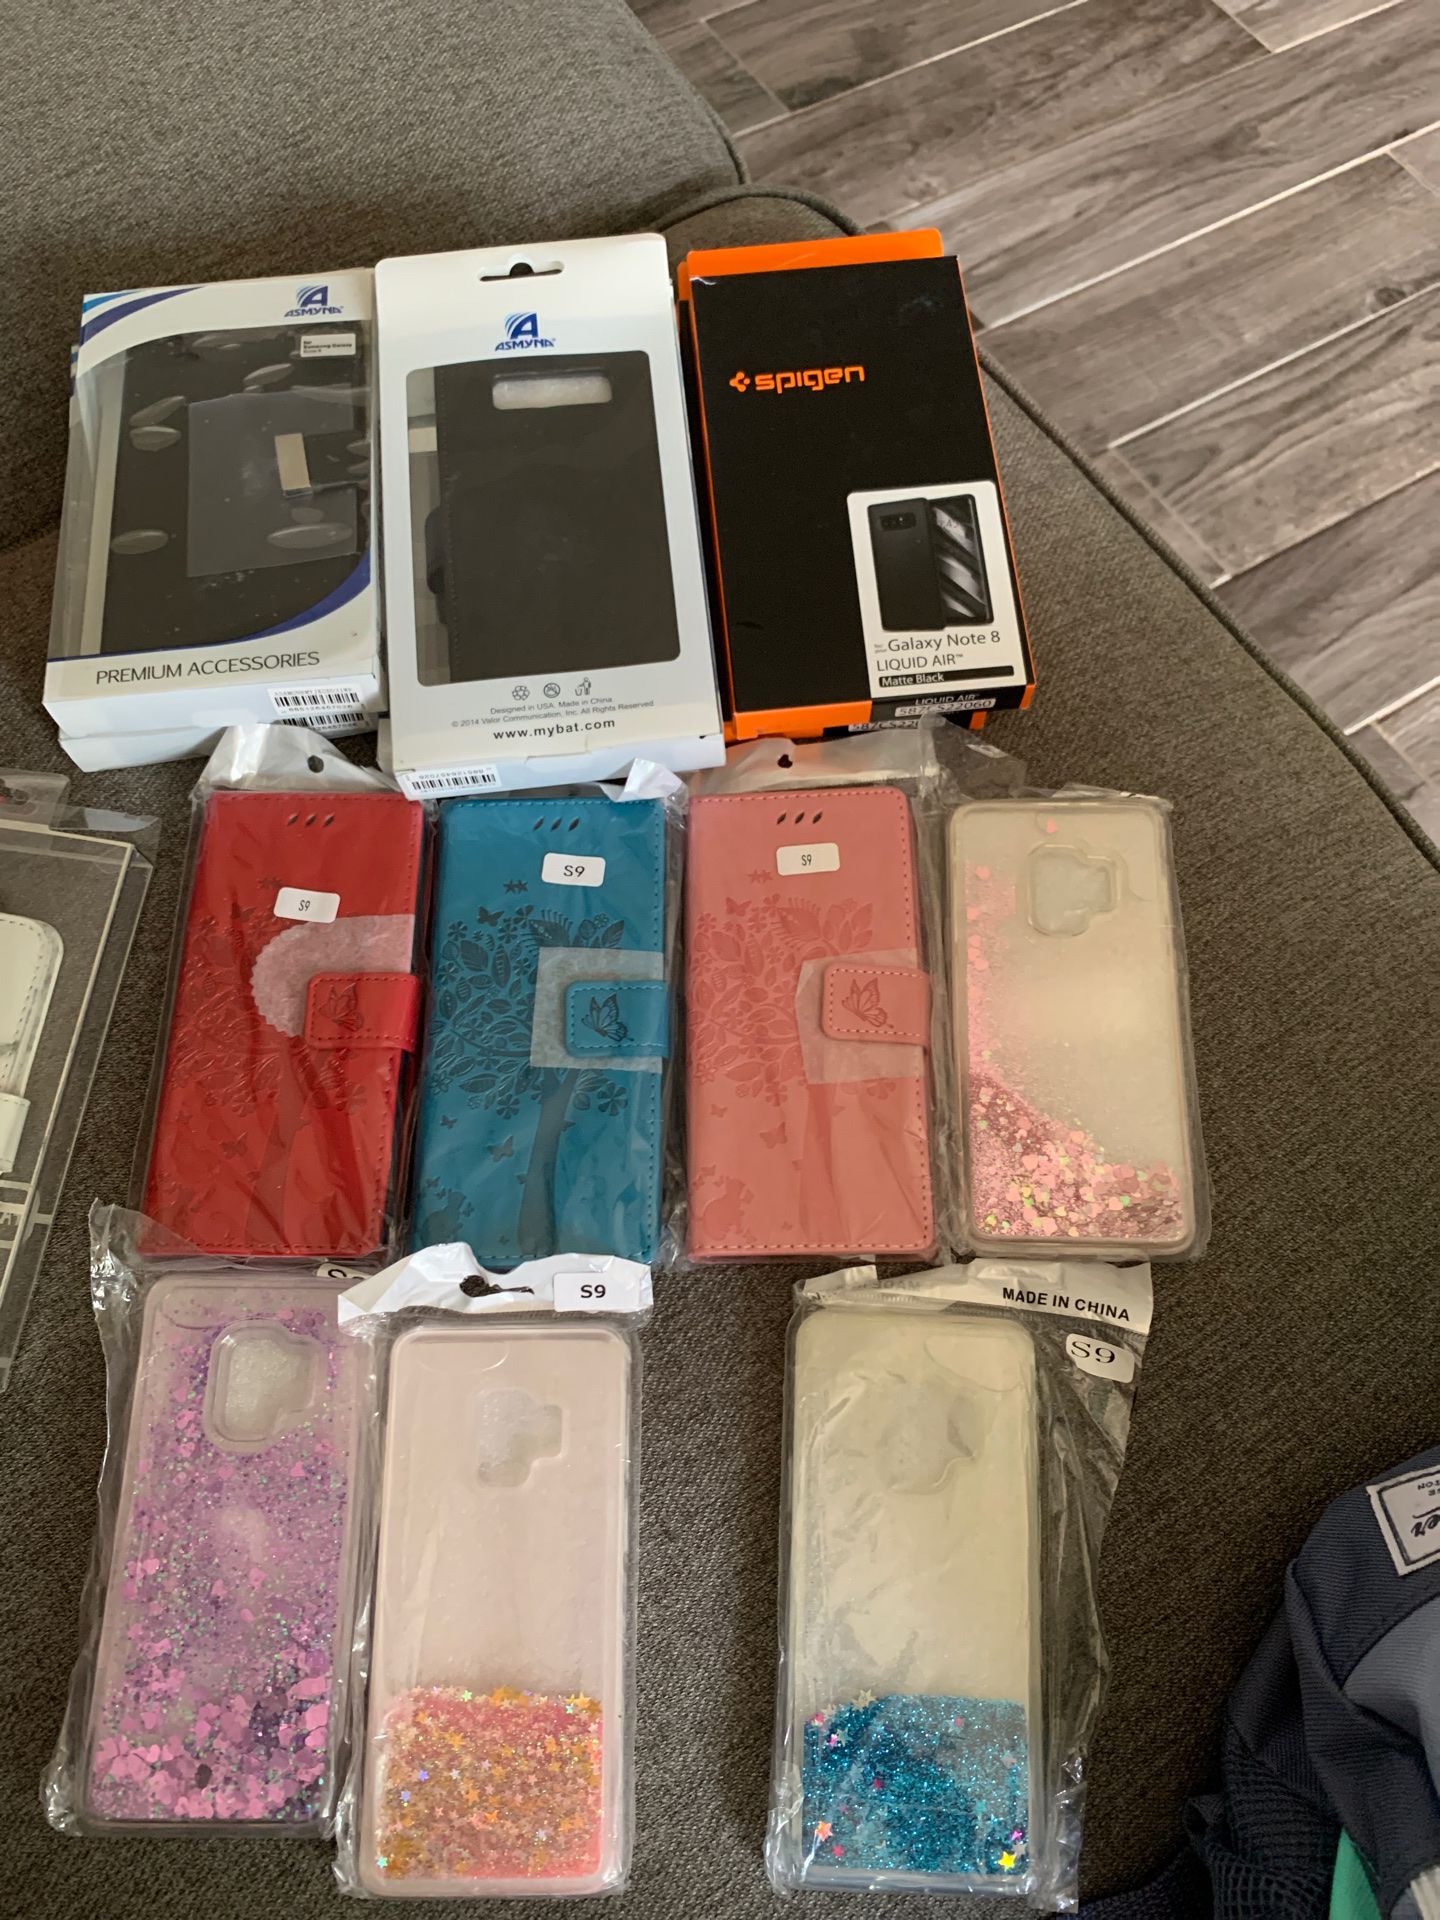 Samsung galaxy note 8 , s9 and iPhone X cases